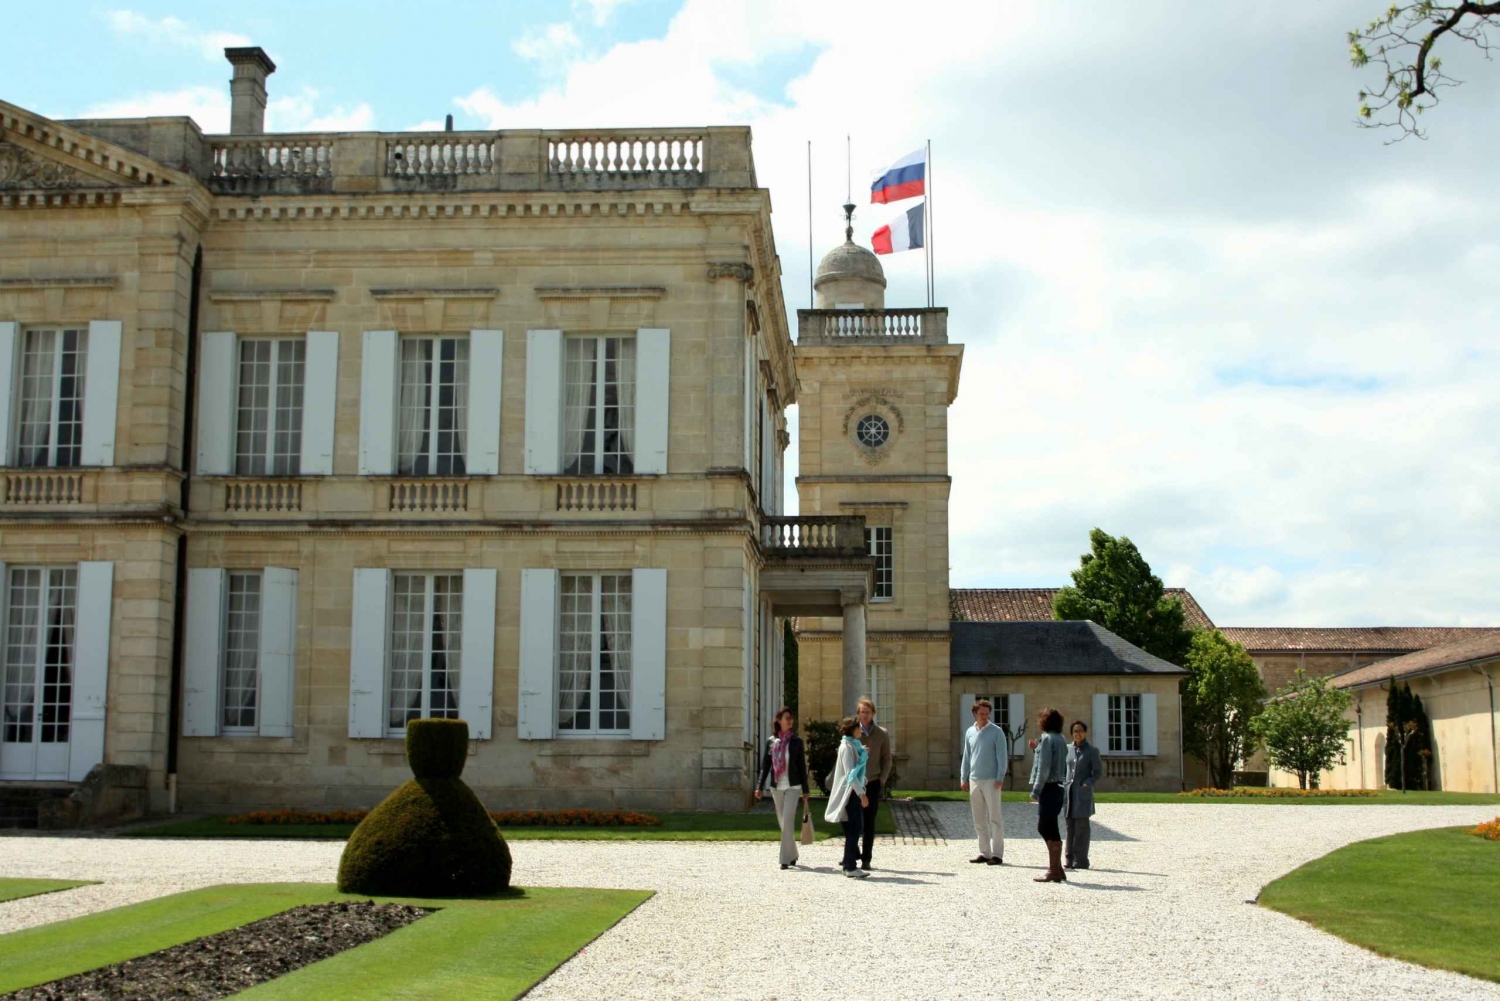 Enjoy a Day Discovering Two Famous Bordeaux Wine Regions